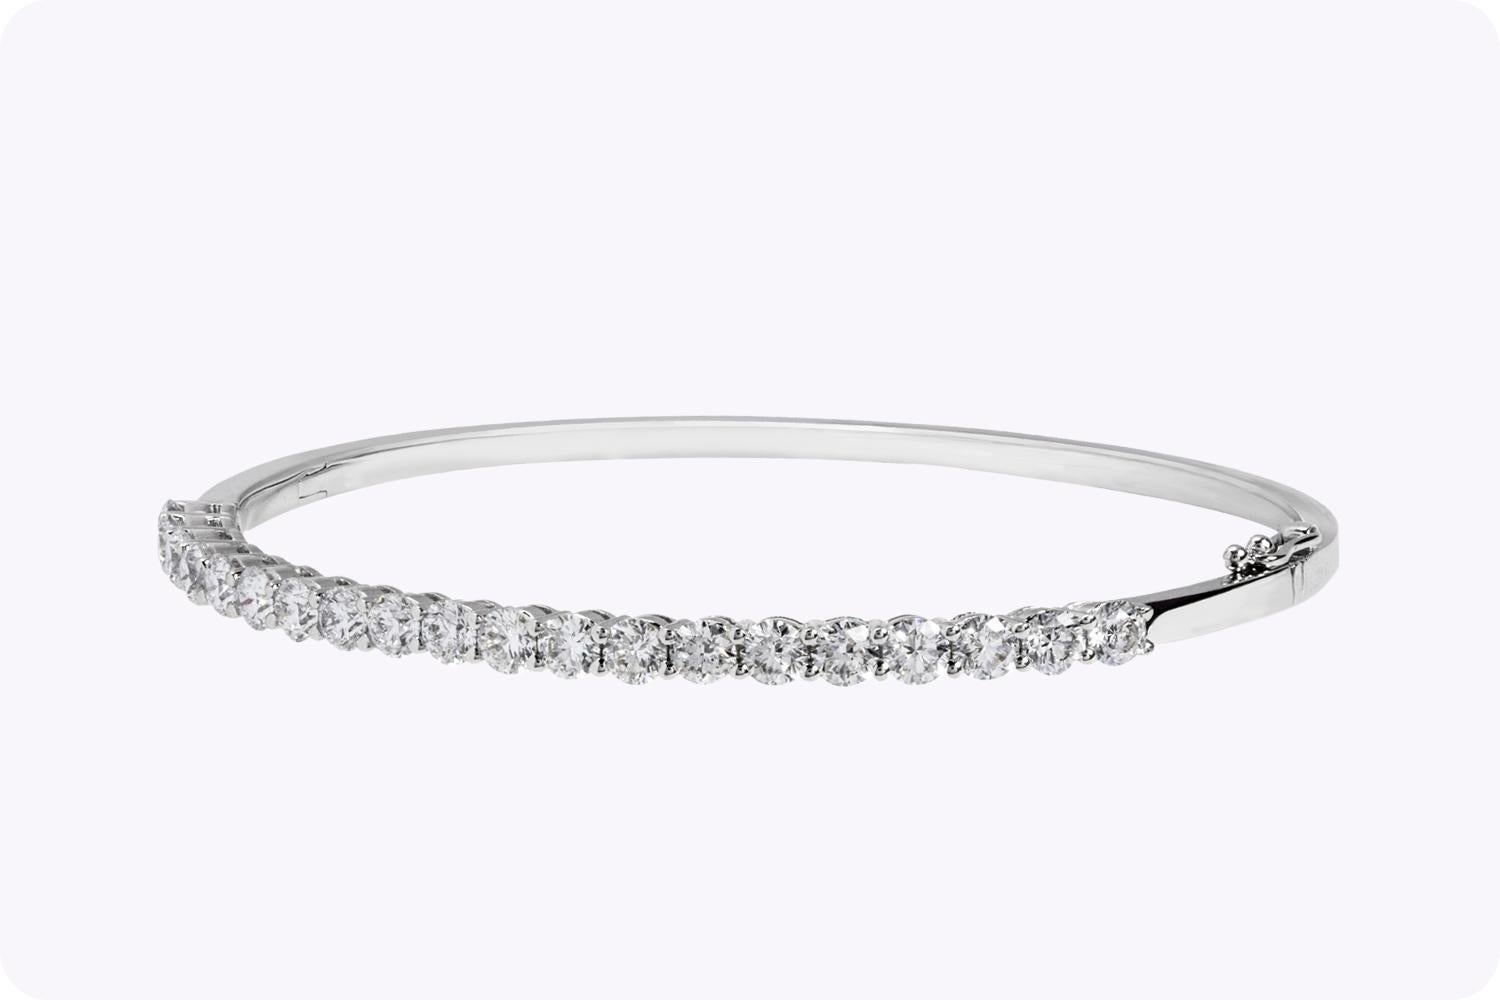 A diamond bangle bracelet that sparkles in the spotlight. It features 20 full-cut round diamonds weighing 3.12 carats total, each elegantly set in an 18K white gold basket. This bracelet's hinged design makes it easy to wear and remove. Made in 18k